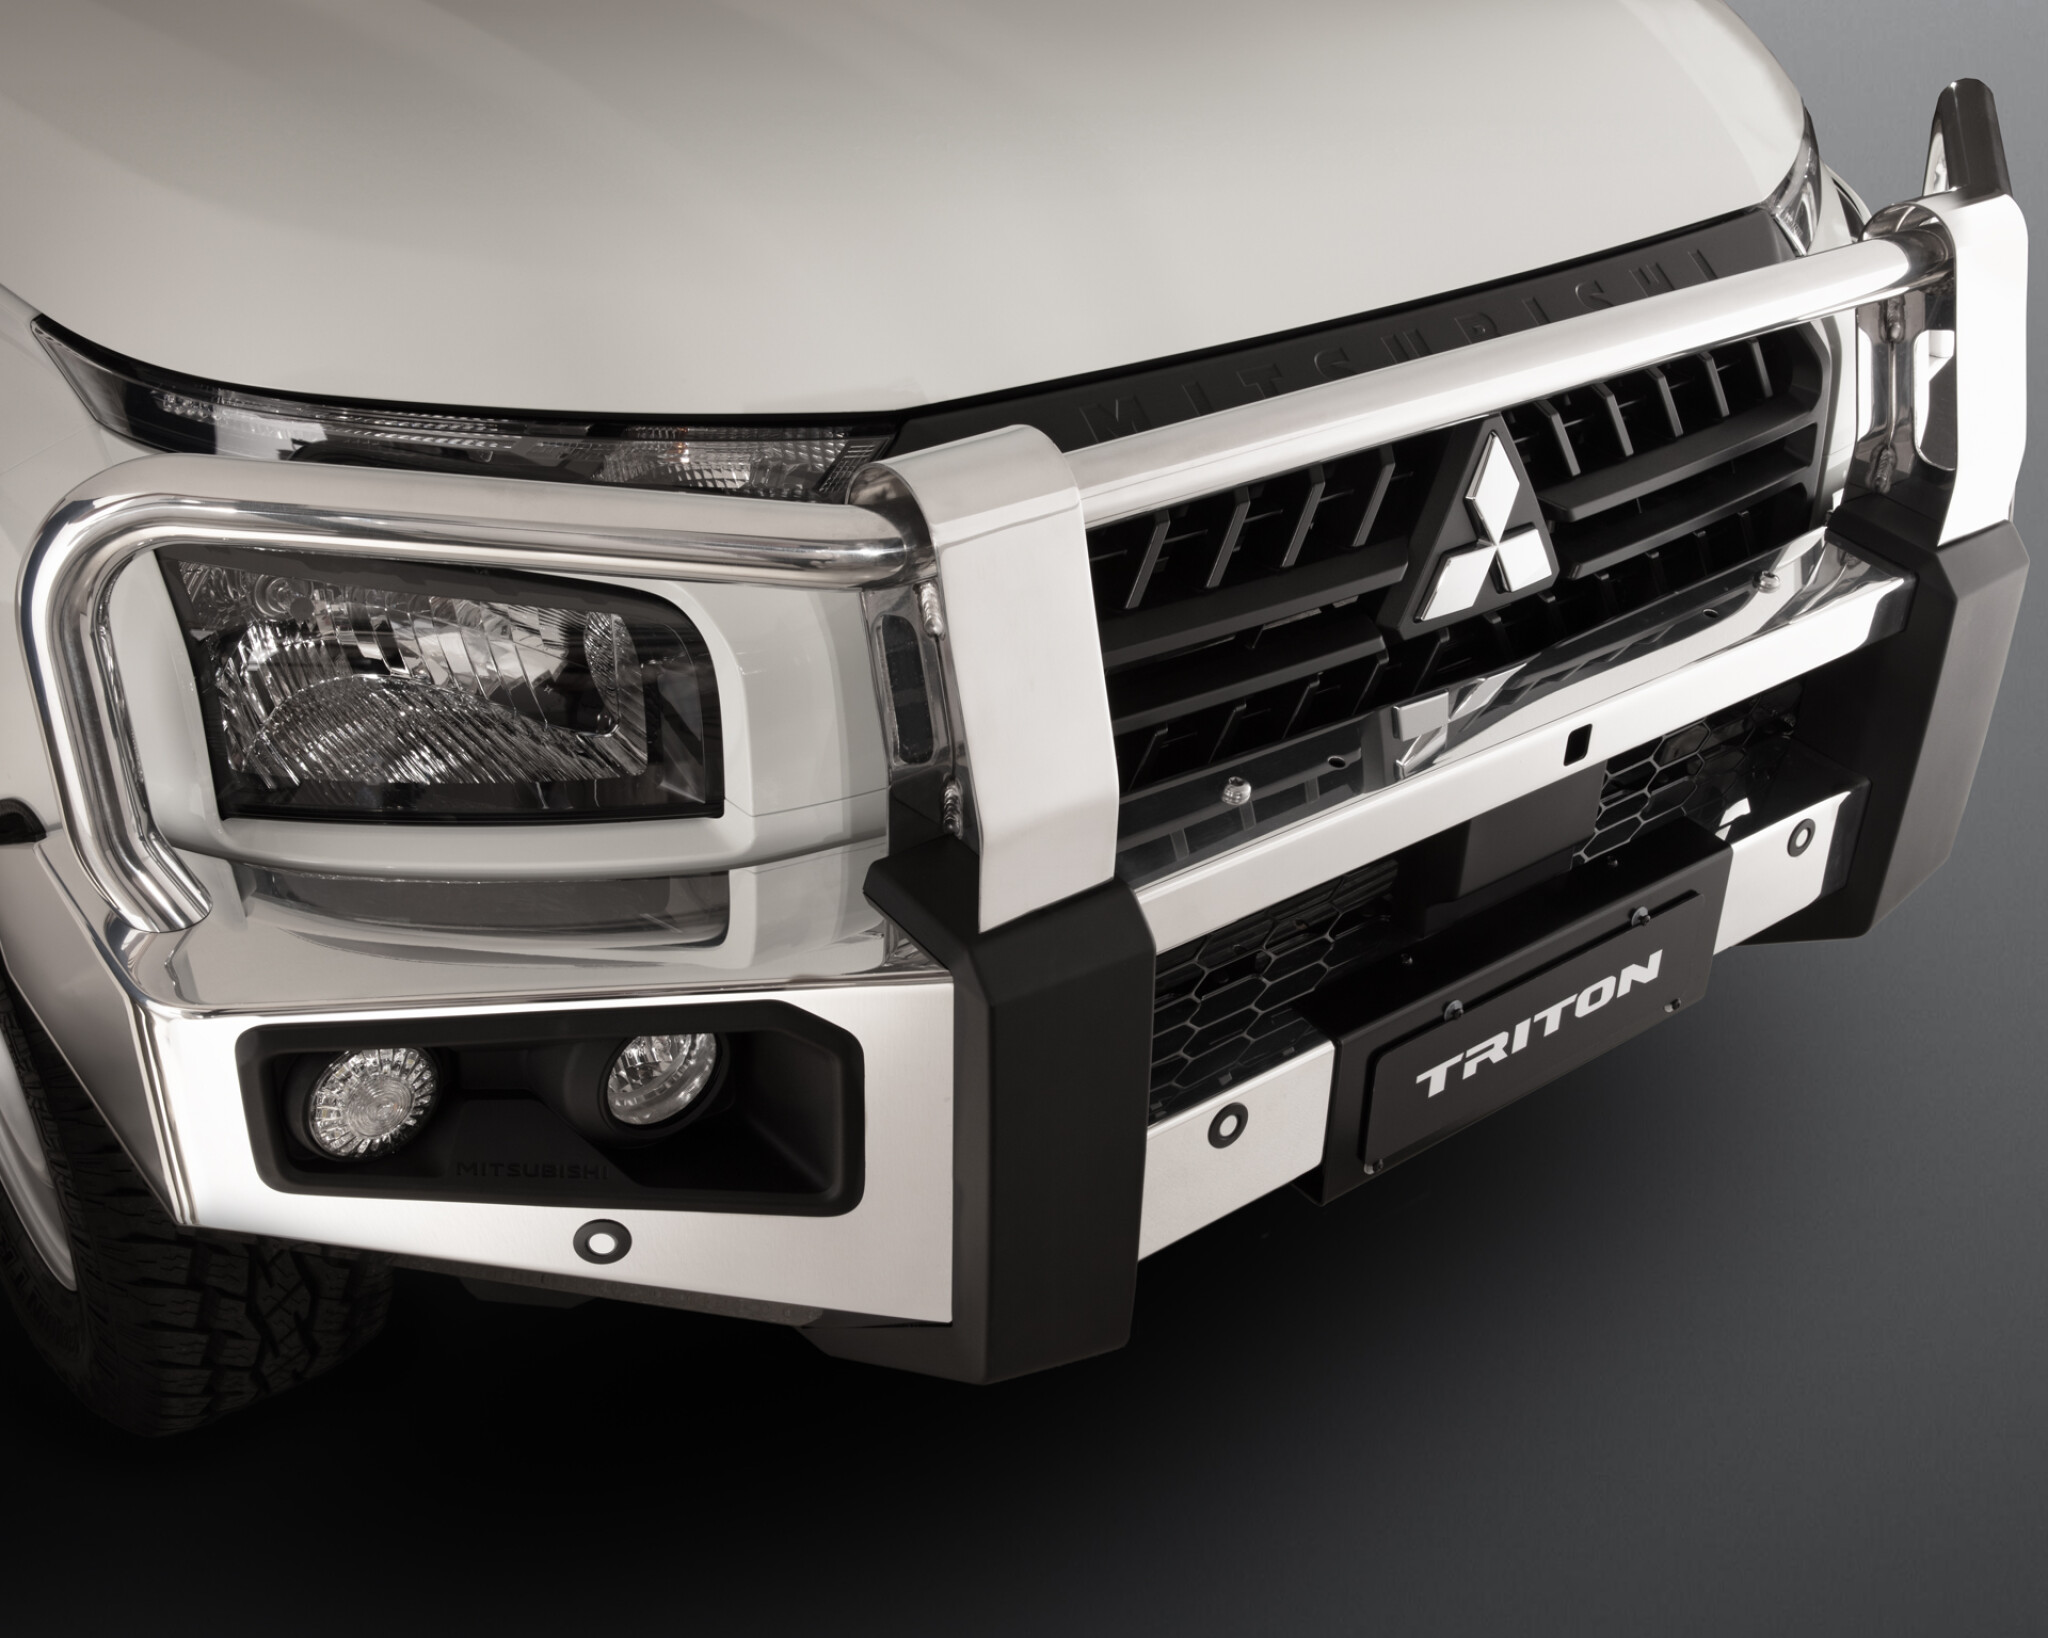 2024 Mitsubishi Triton accessories What is available?